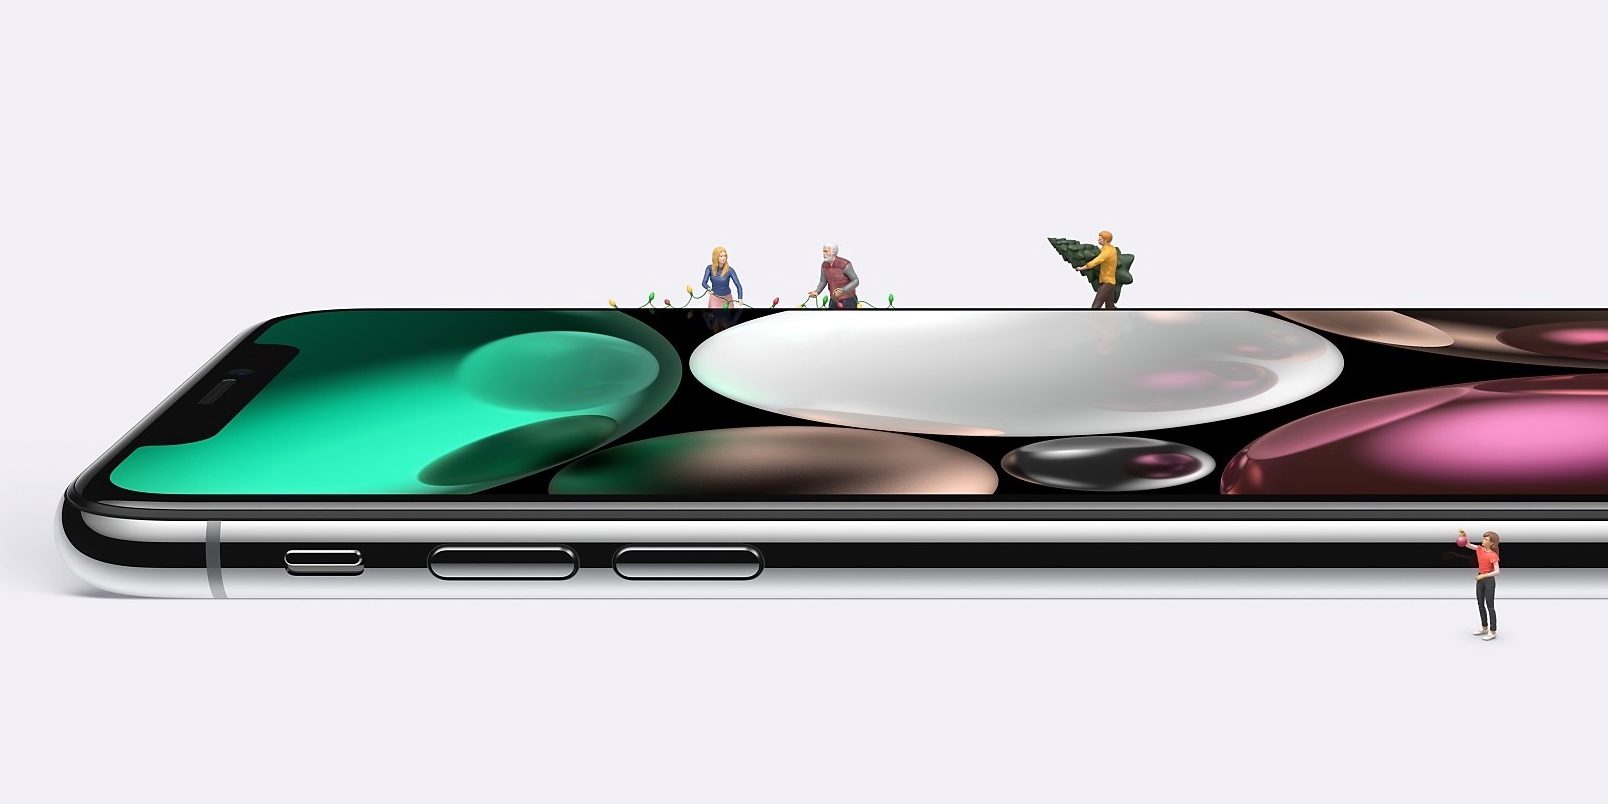 6 million iPhone X Units Sold Over Black Friday Weekend, Buyers Favor More Expensive 256 GB Model